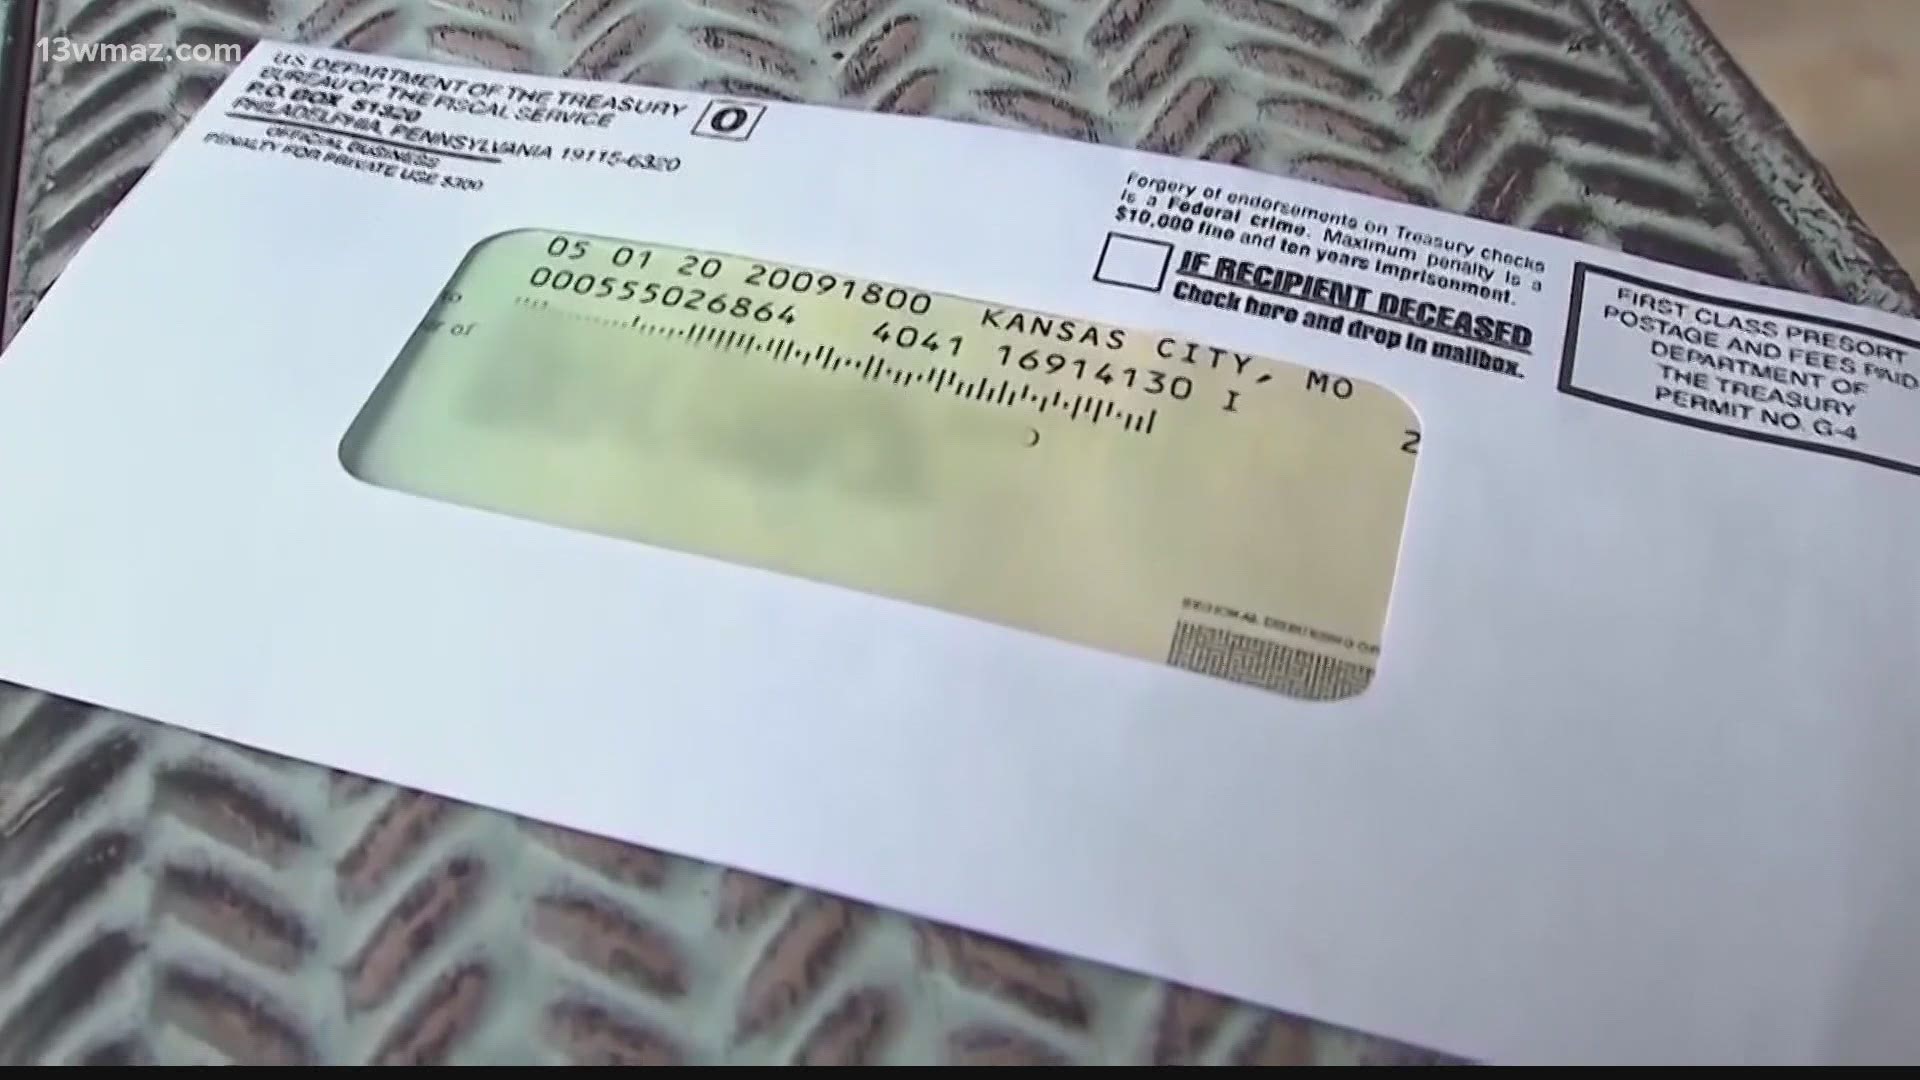 There are ways to get an EIP card mailed to you, even if you don't have a mailing address.